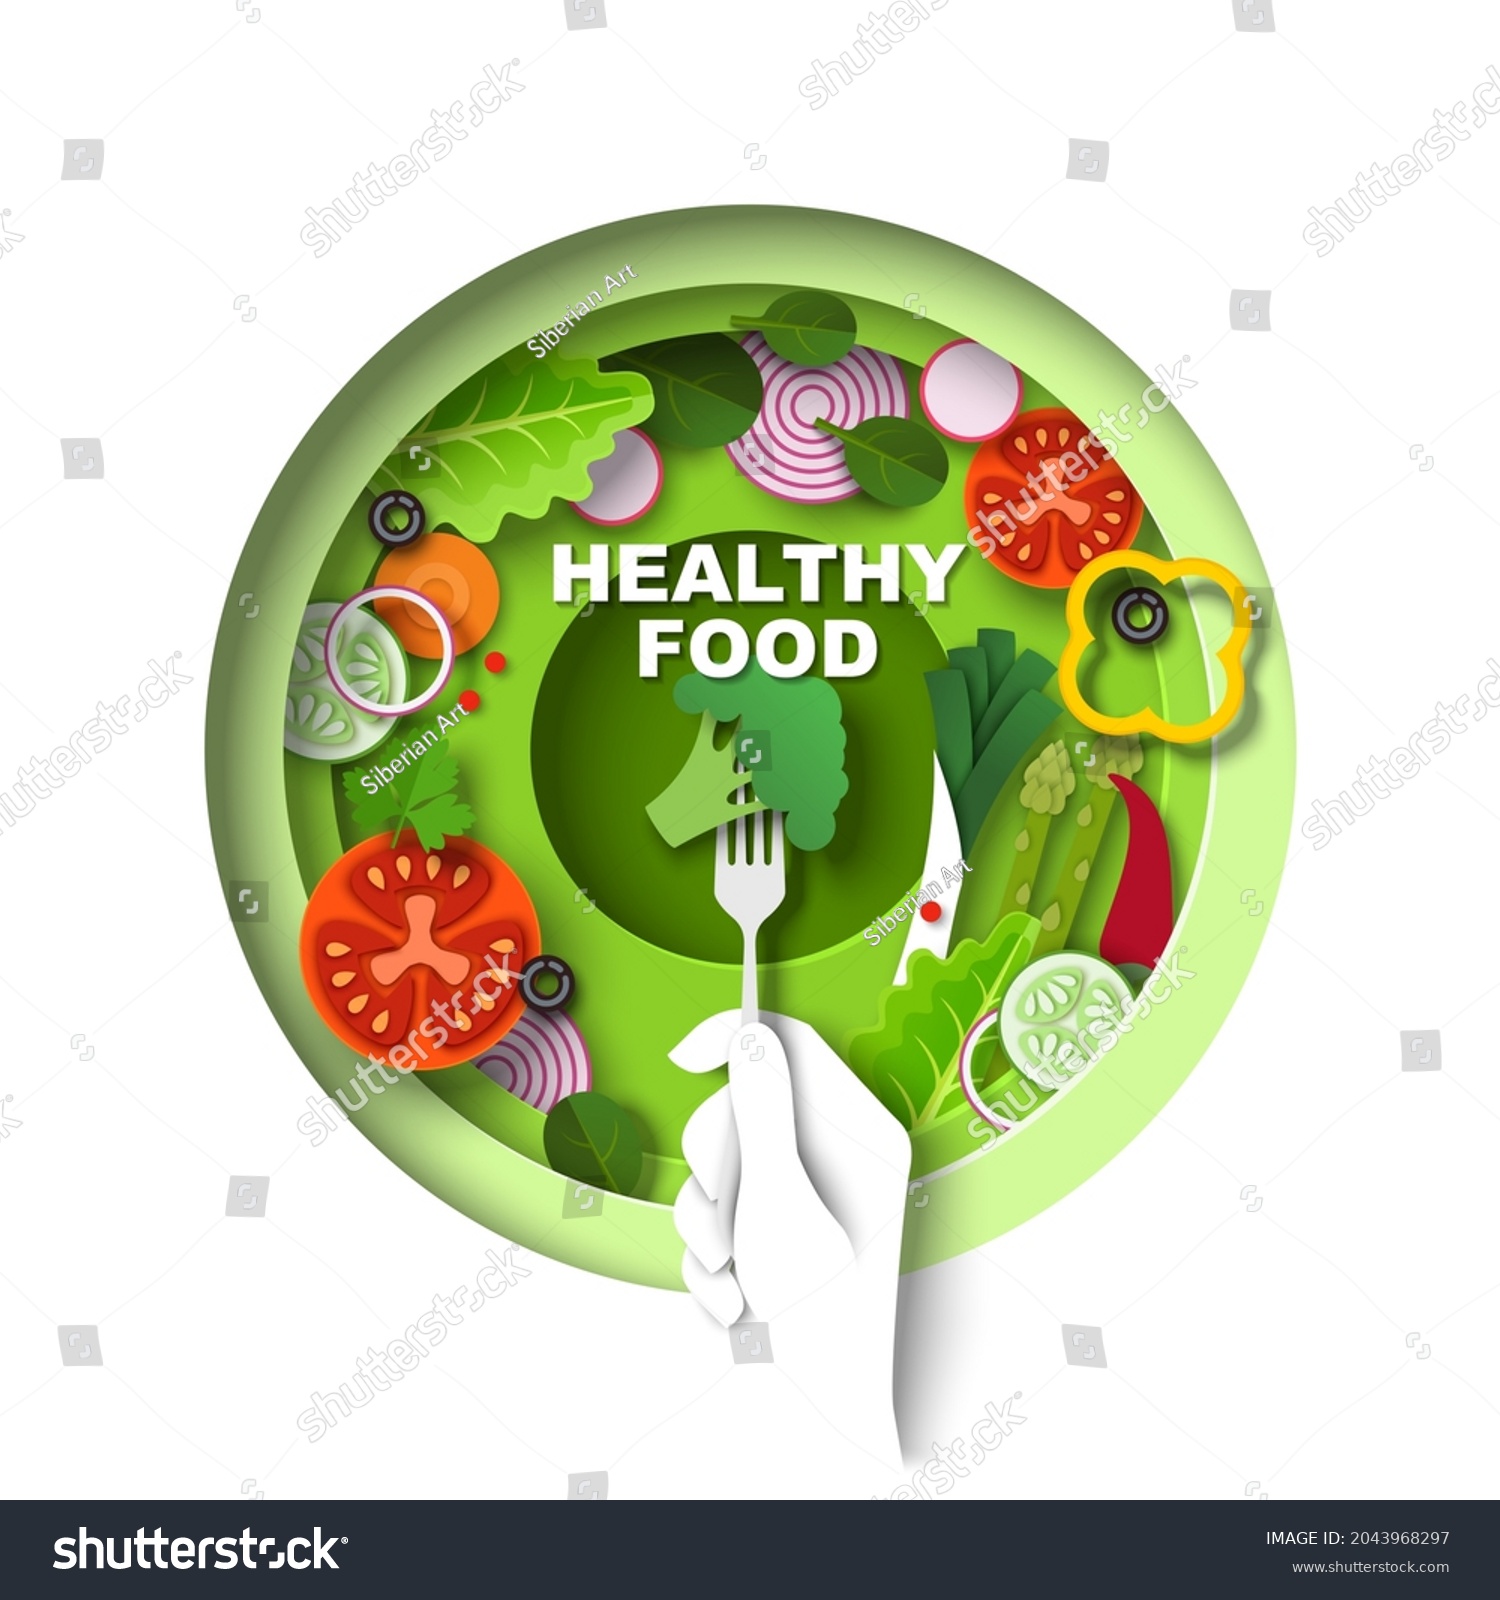 Bowl with delicious vegan salad, hand holding fork with broccoli, vector top view illustration in paper art style. Healthy diet, vegetarian meal. Healthy food poster, banner design template. #2043968297